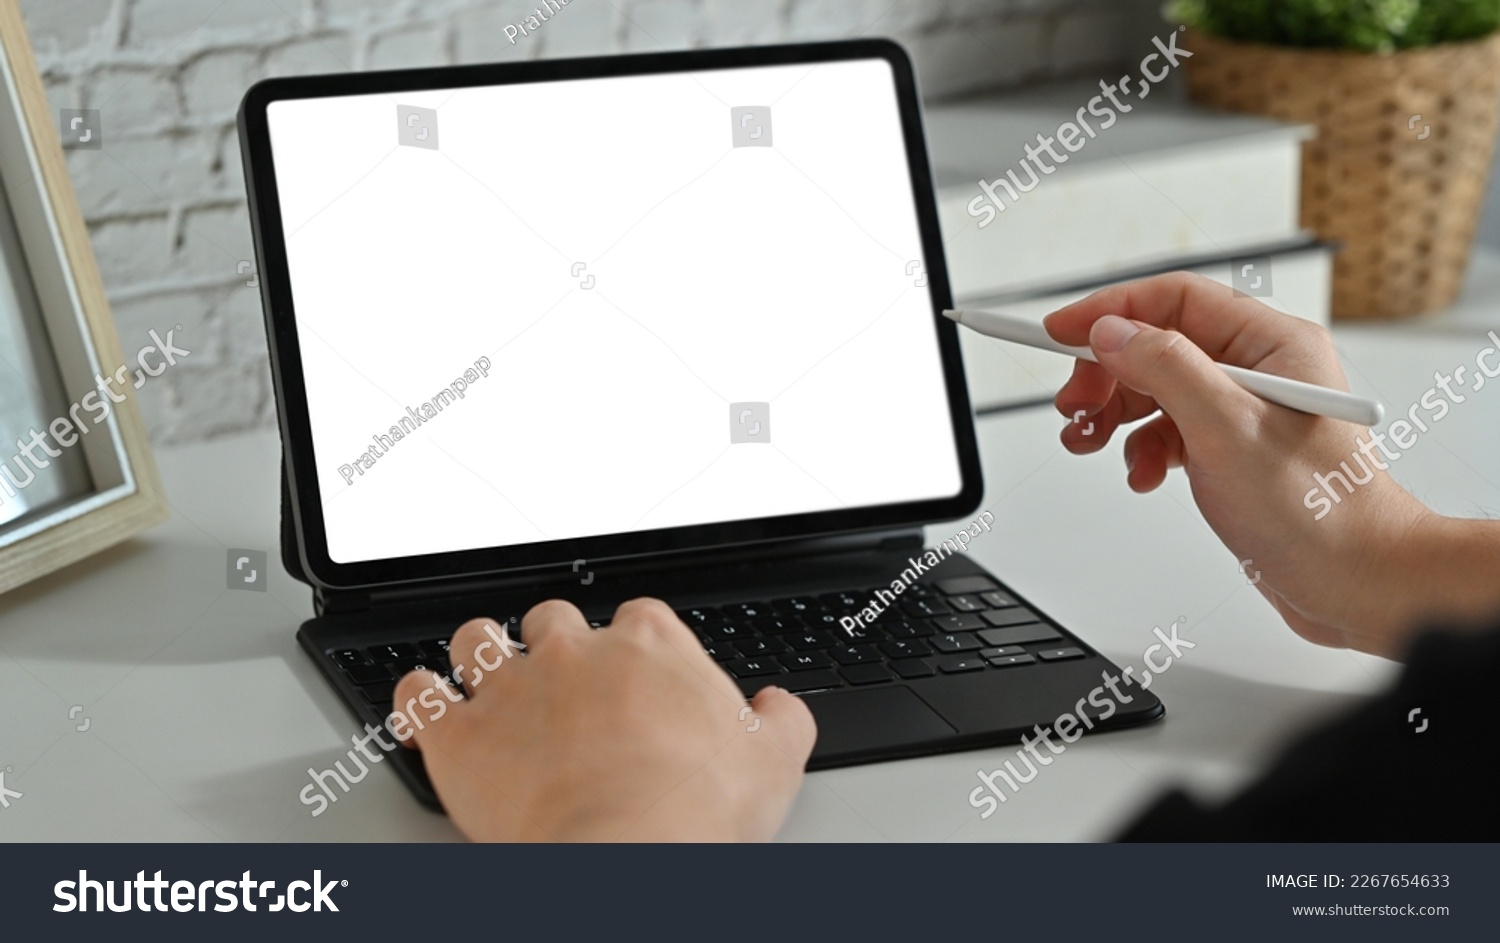 Creative man hand holding stylus pen and pointing on digital tablet screen. Cropped shot #2267654633